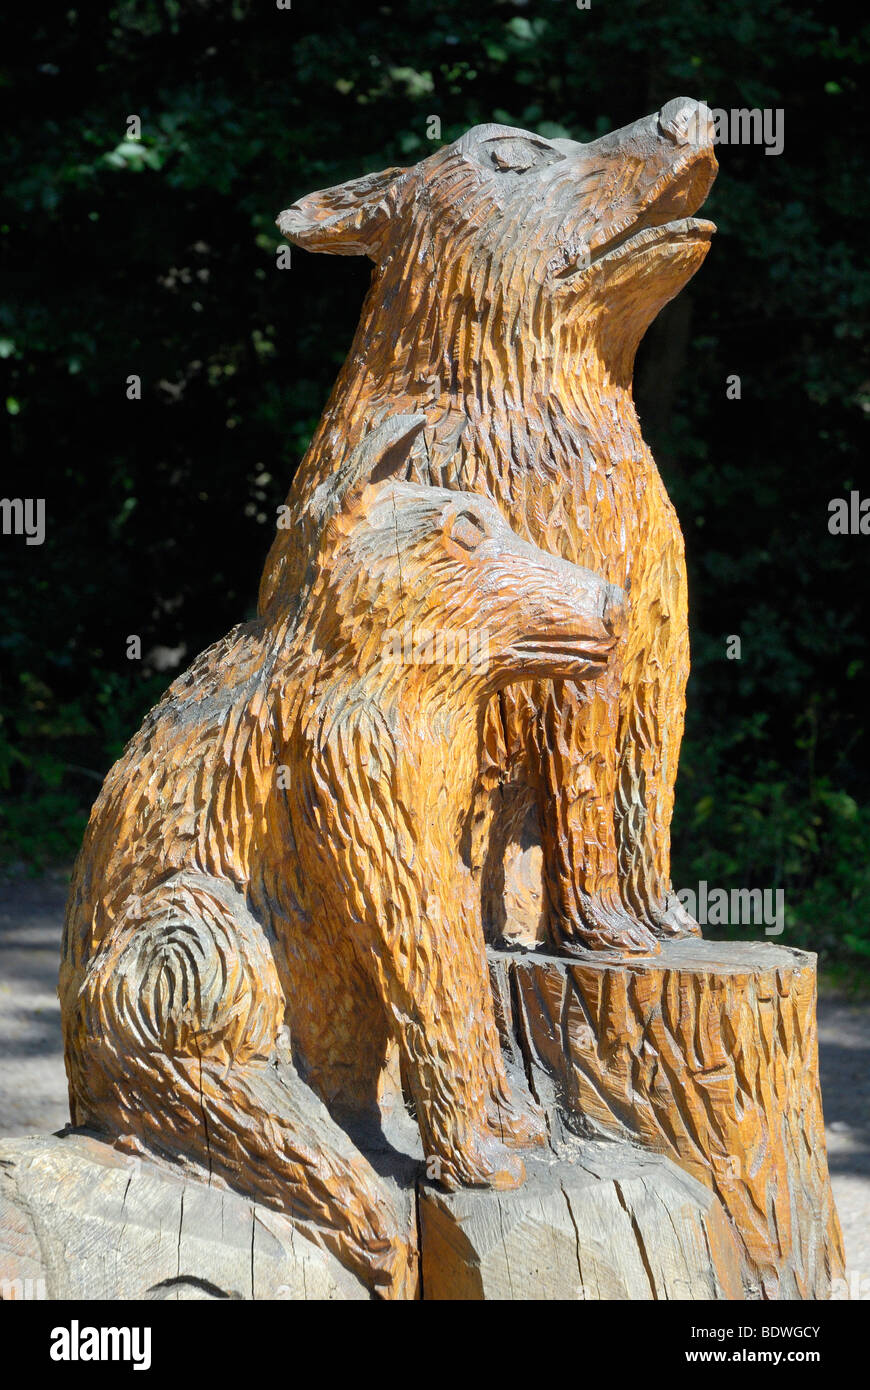 Wooden sculpture of a howling wolf with young wolf, Biosphere Reserve, Fischbach bei Dahn, Palatinate, Rhineland-Palatinate, Ge Stock Photo